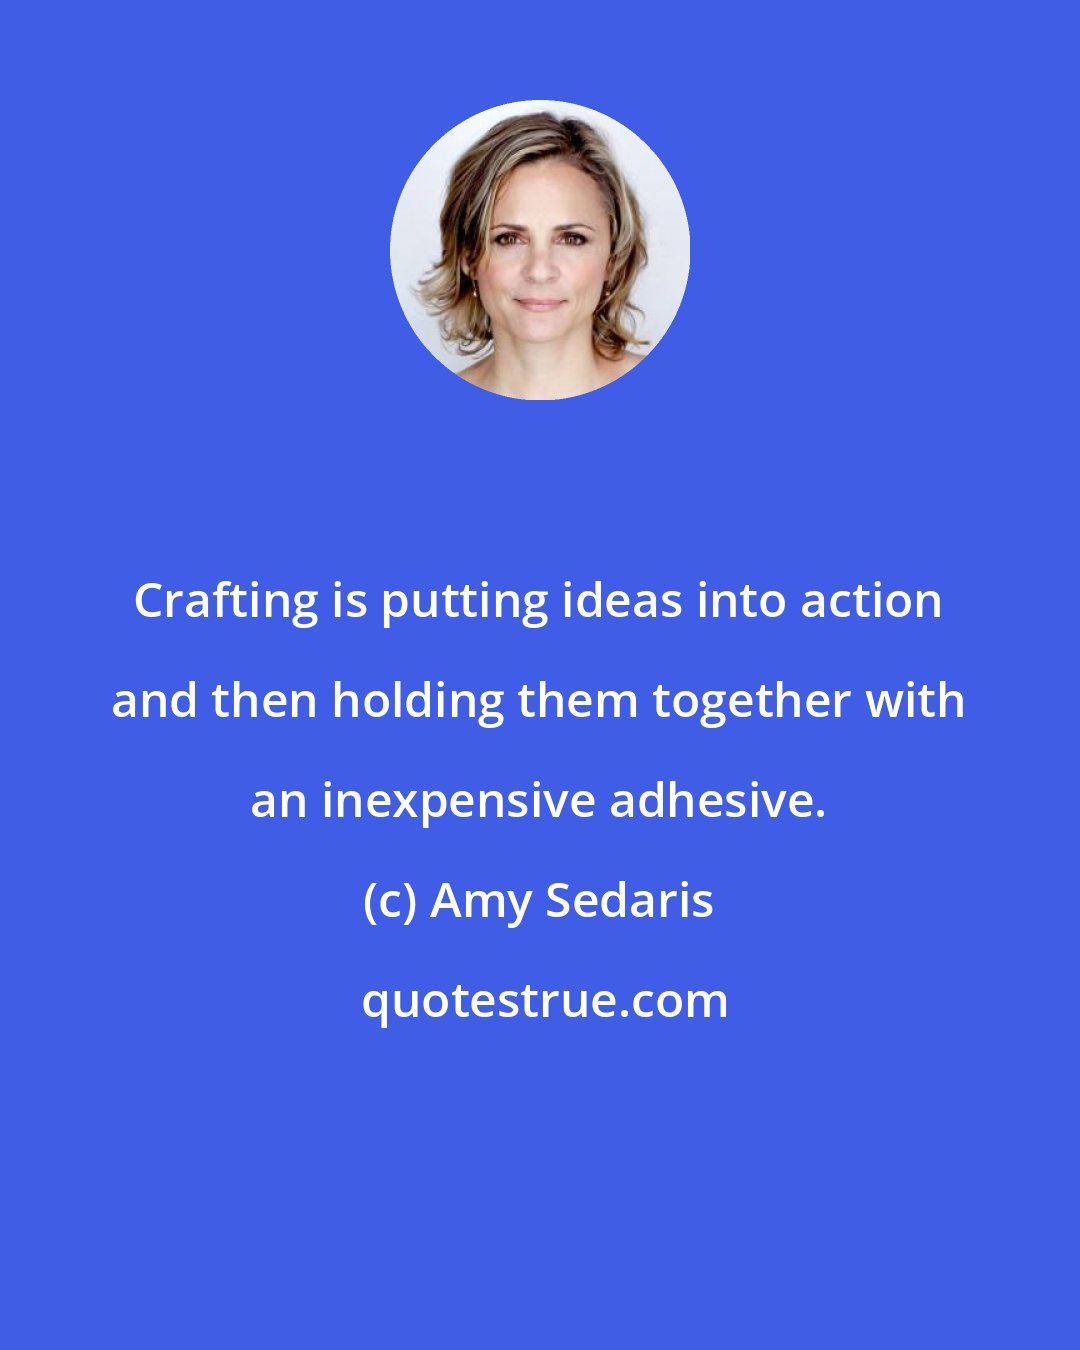 Amy Sedaris: Crafting is putting ideas into action and then holding them together with an inexpensive adhesive.